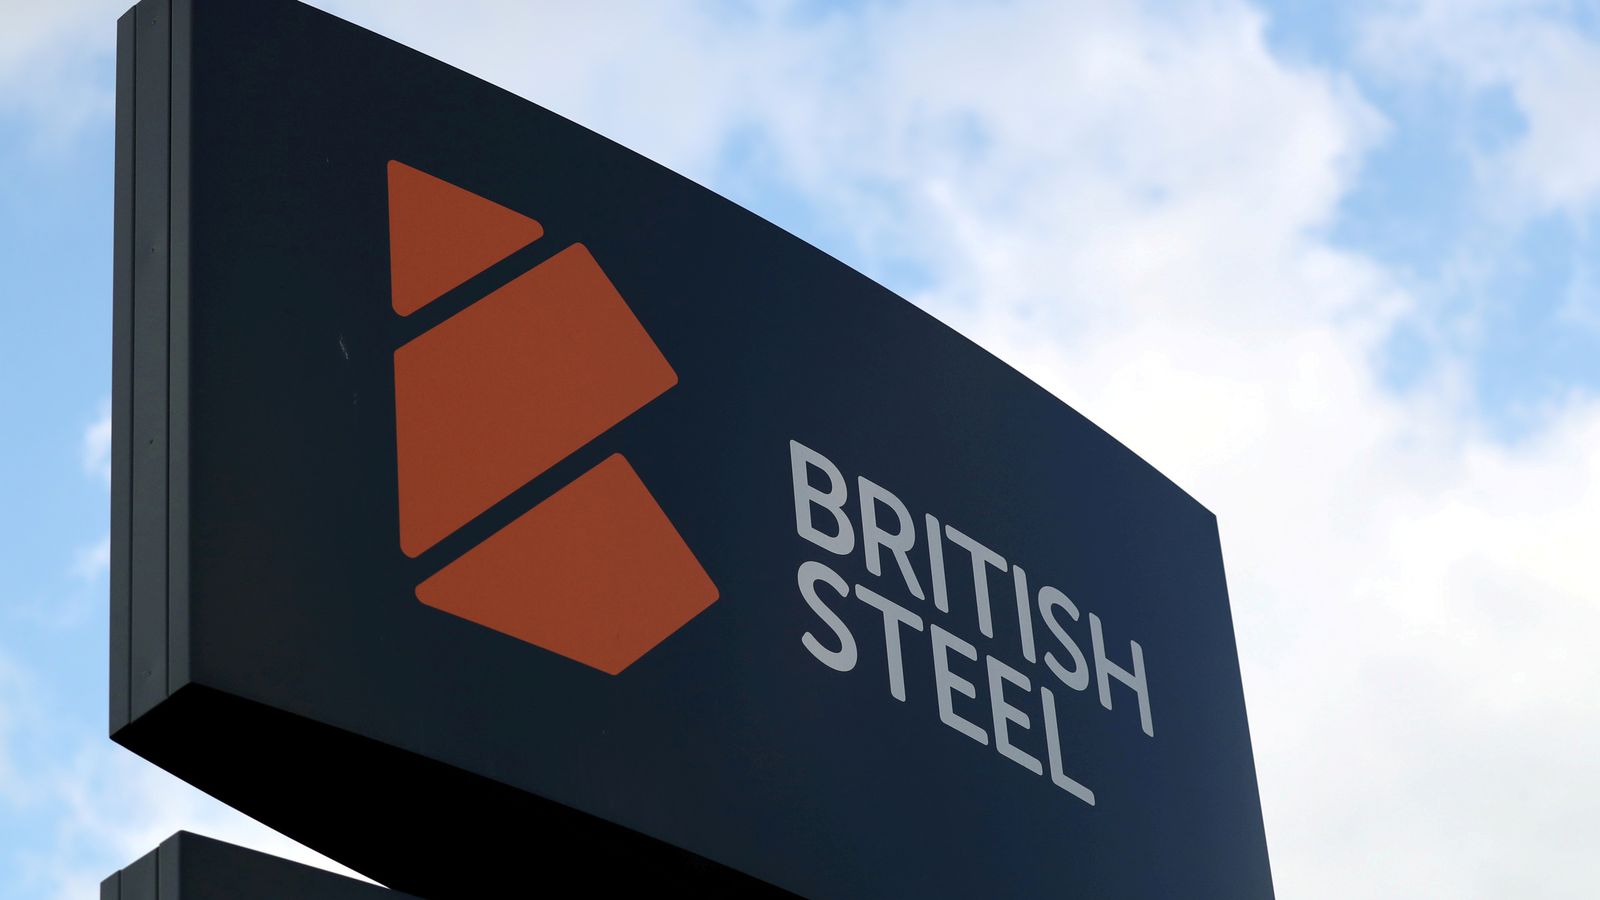 British Steel to shut down blast furnaces at Scunthorpe plant 'leaving 2,000 jobs at risk'